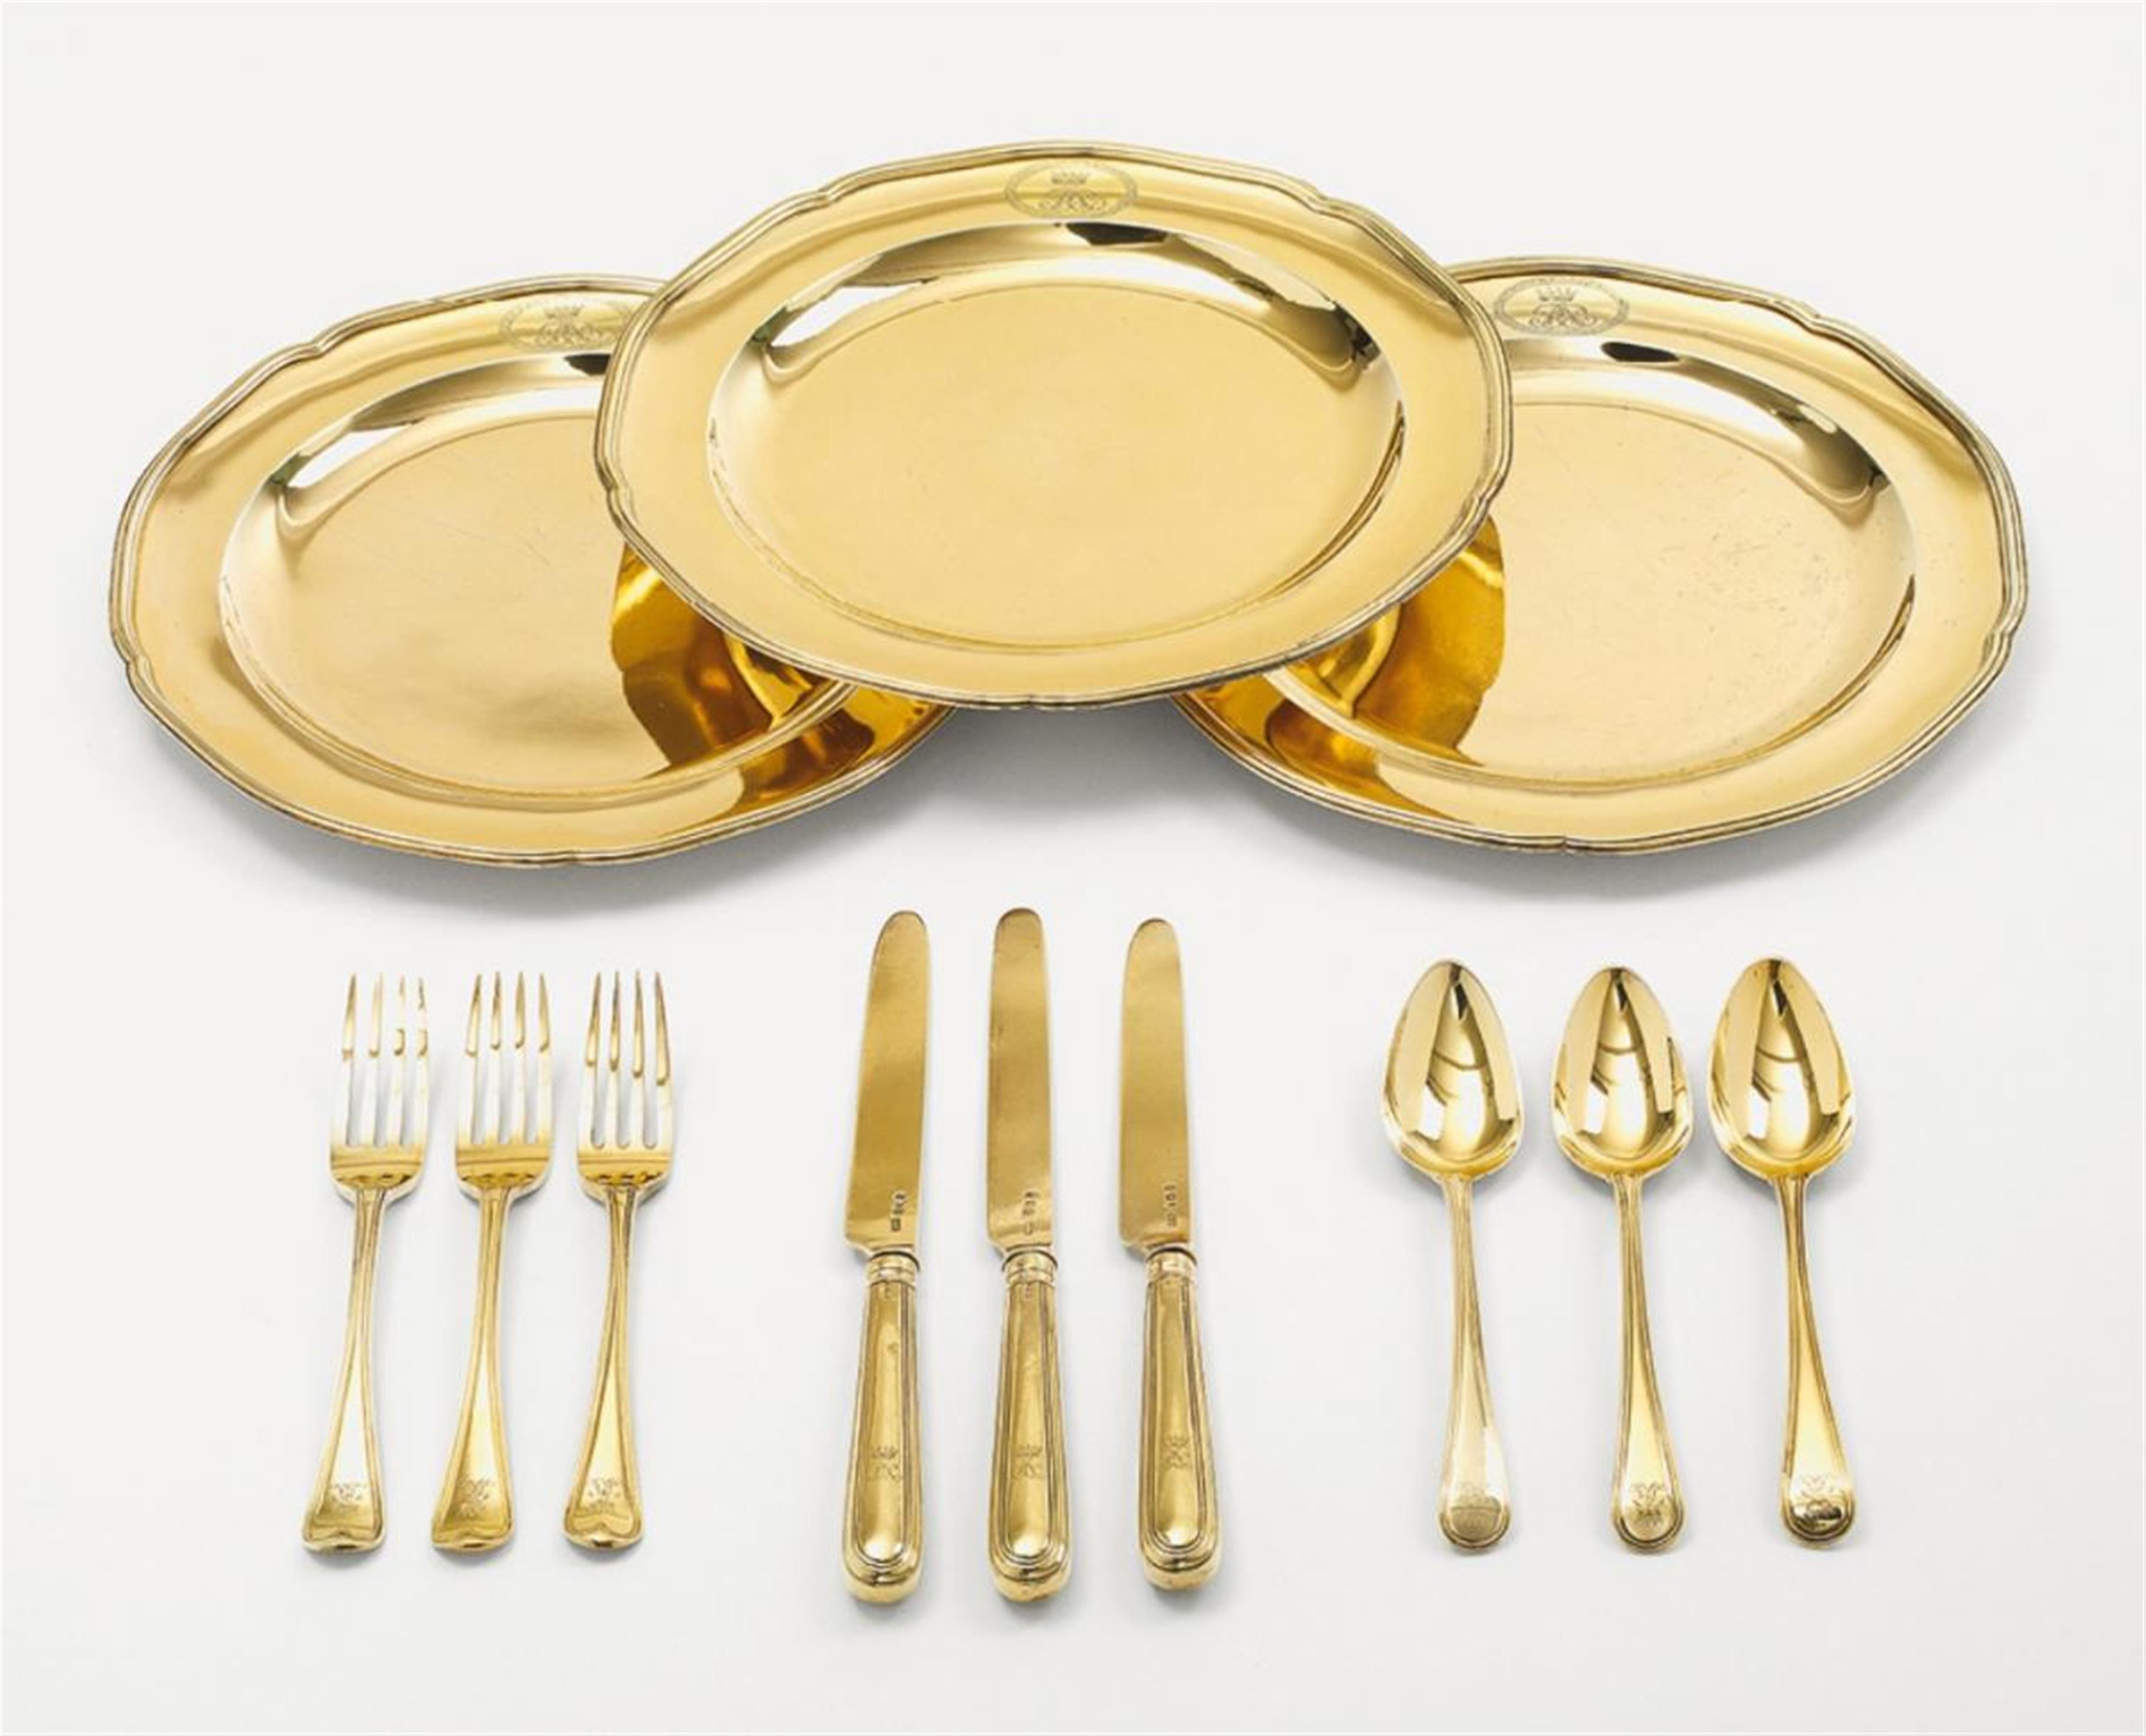 Three George III silver gilt dessert sets, all monogrammed with a crowned "R". Comprising plates, knives, forks and spoons. Various marks, London 1794 -1837. - image-1